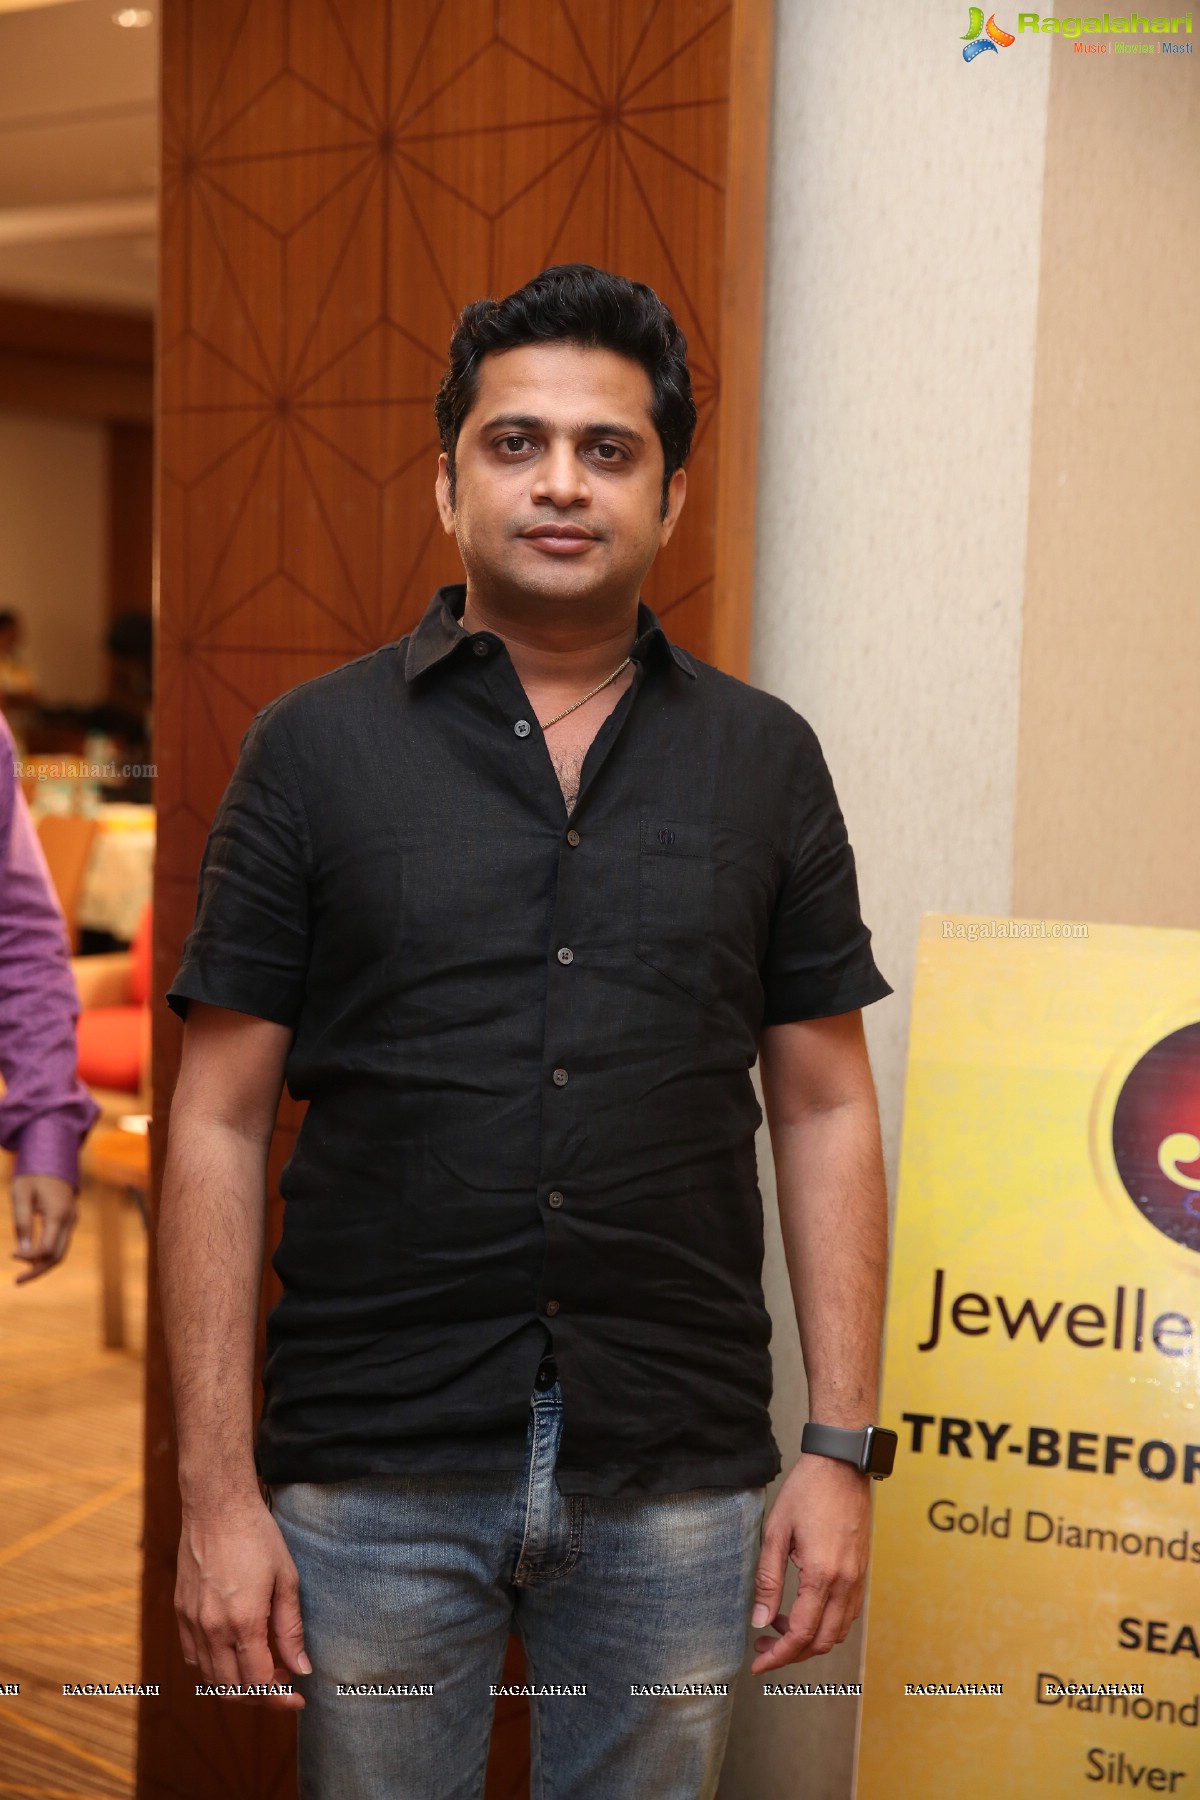 JewelleryCart.in - ‘Try-Before-You-Buy’ - App Launch by Sri Kimtee Jewellers at Hyatt Place, Banjara Hills